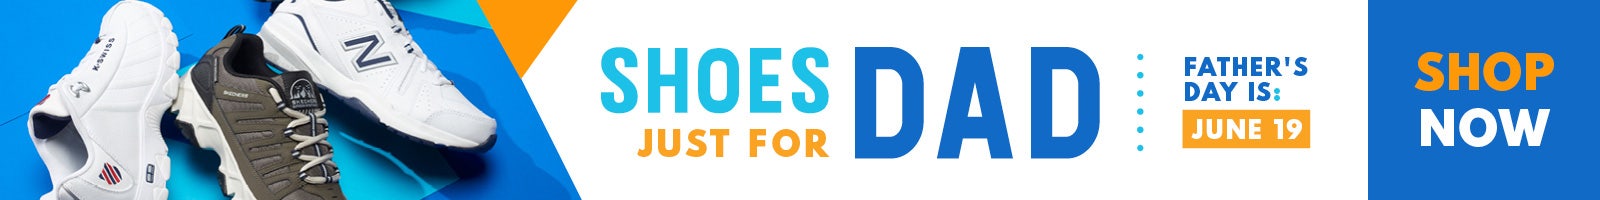 Shop Shoes for Fathers' Day!